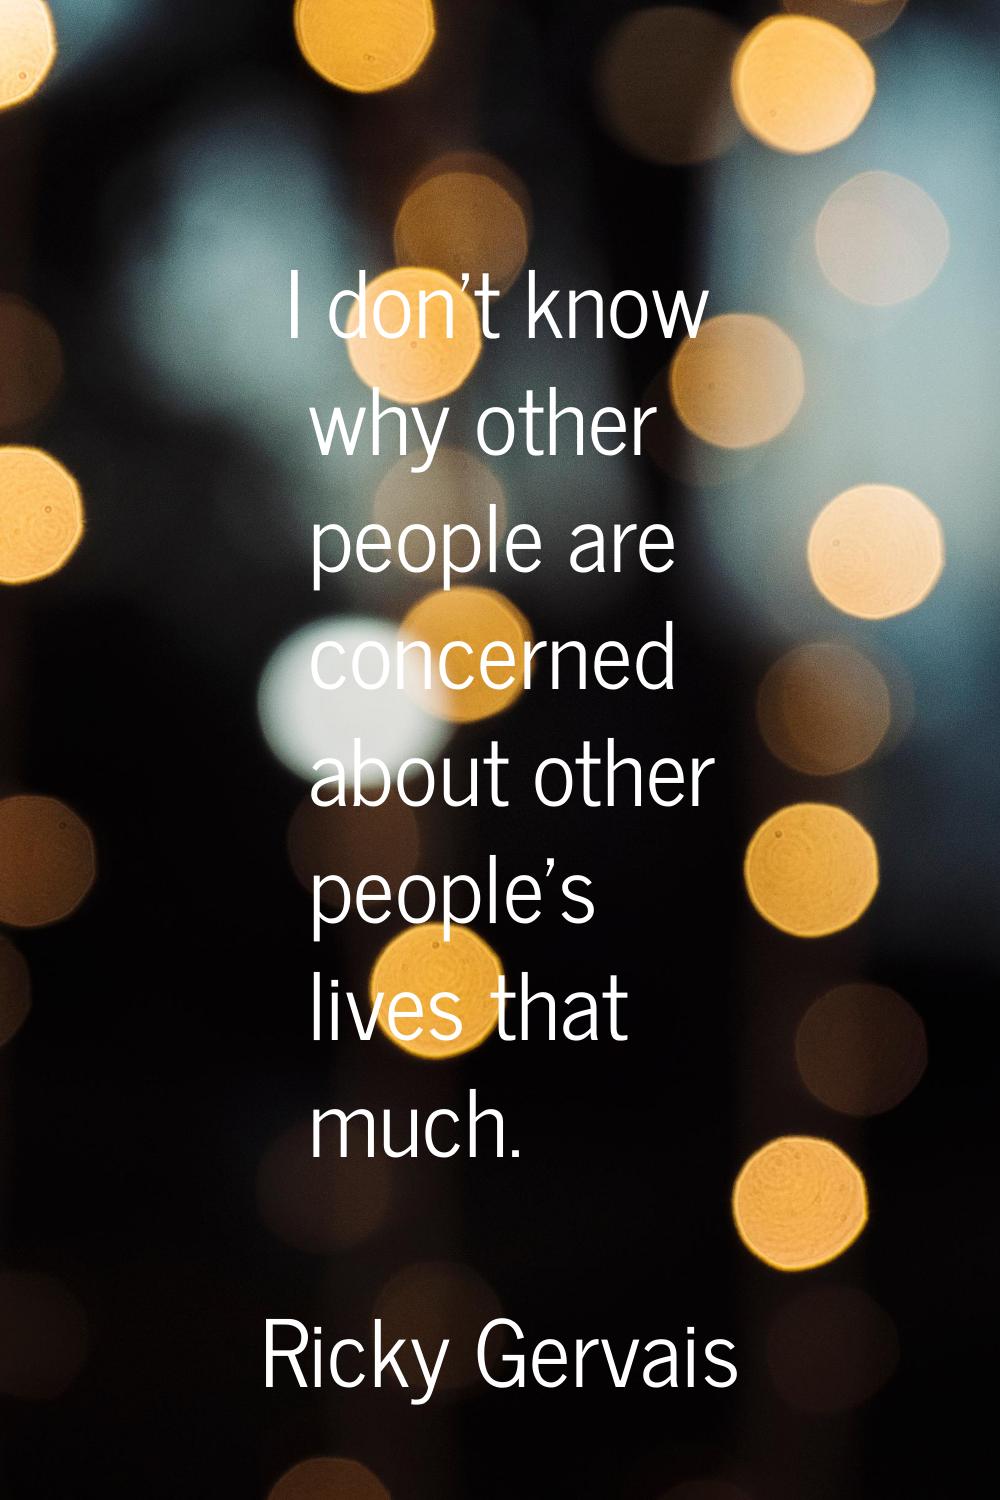 I don't know why other people are concerned about other people's lives that much.